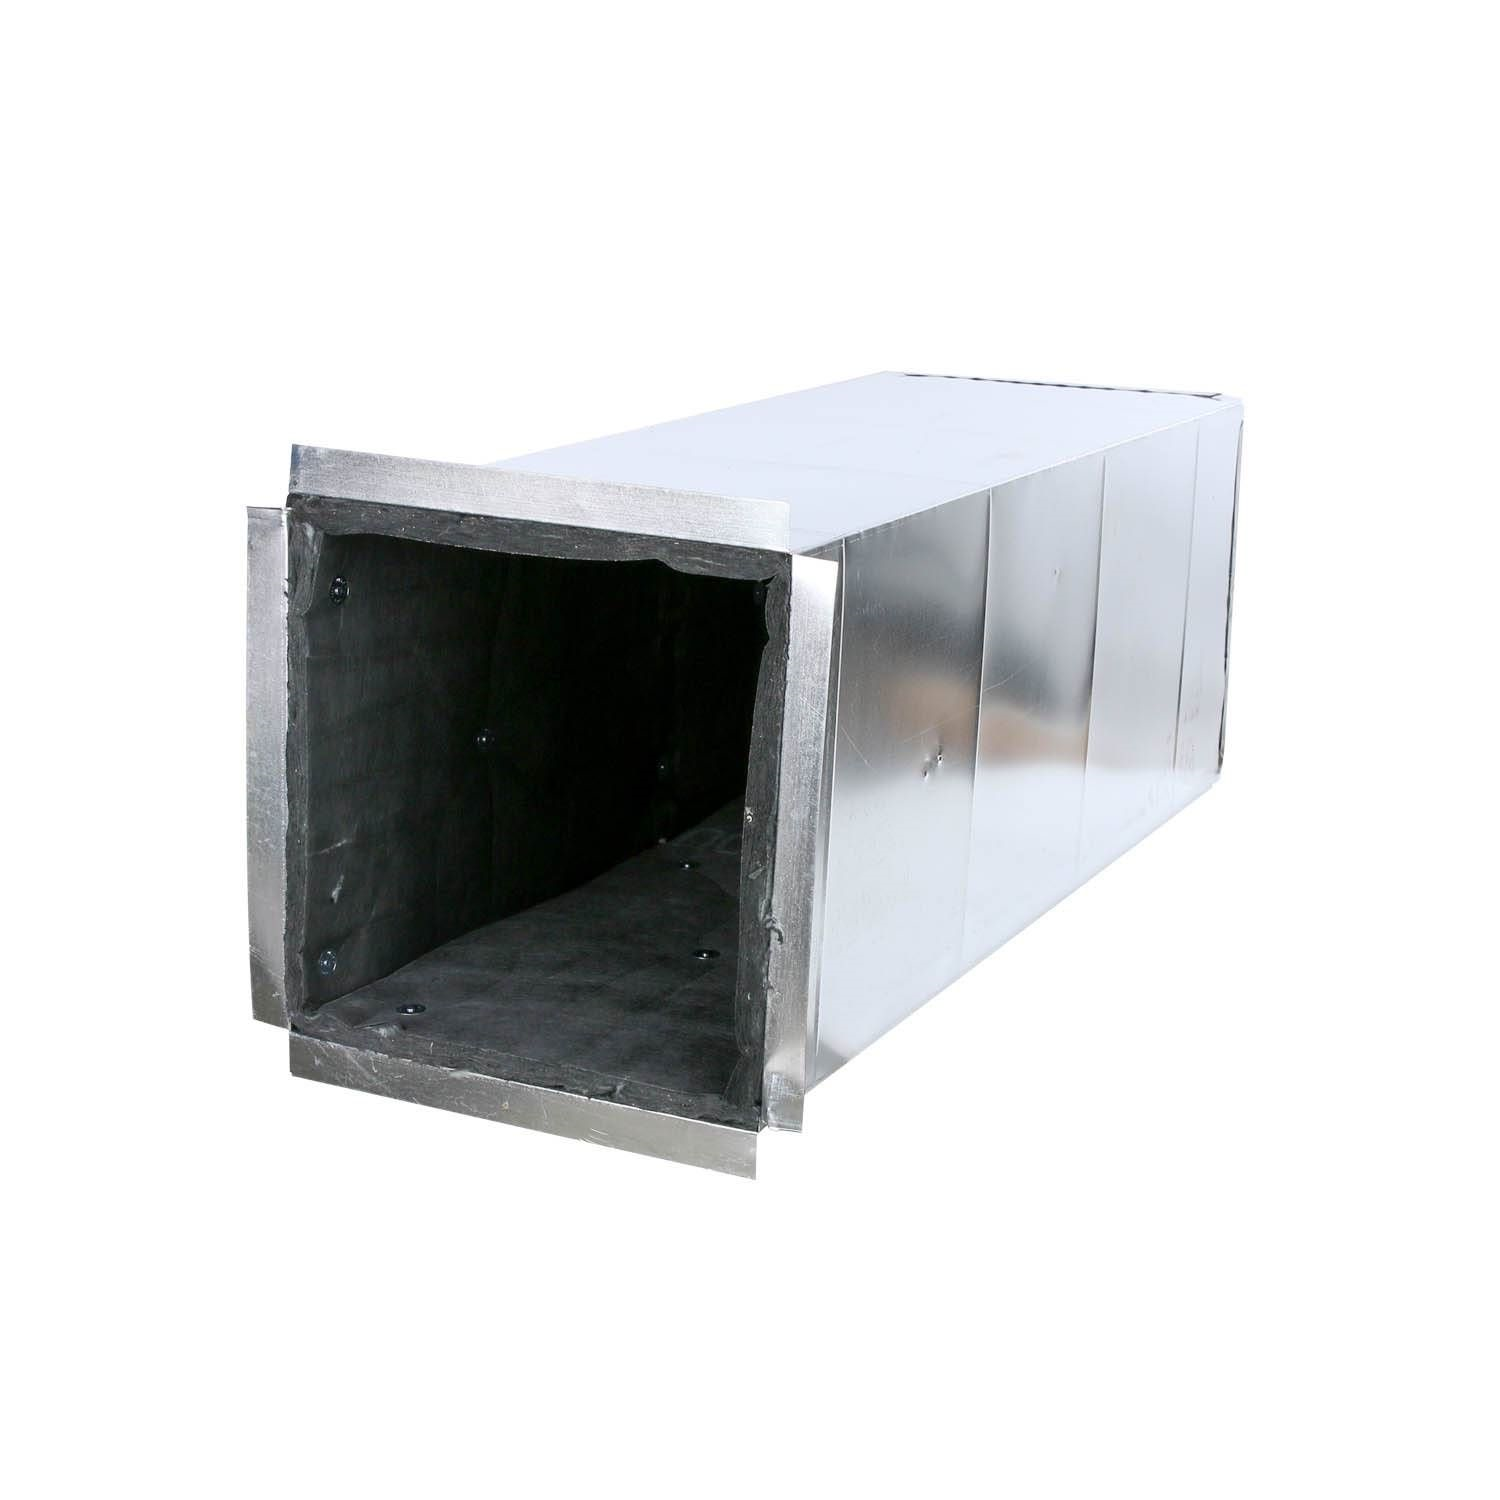 PLENUM FOR REX RACK 19.25 X 20 X 24D - Plenums and Transitions